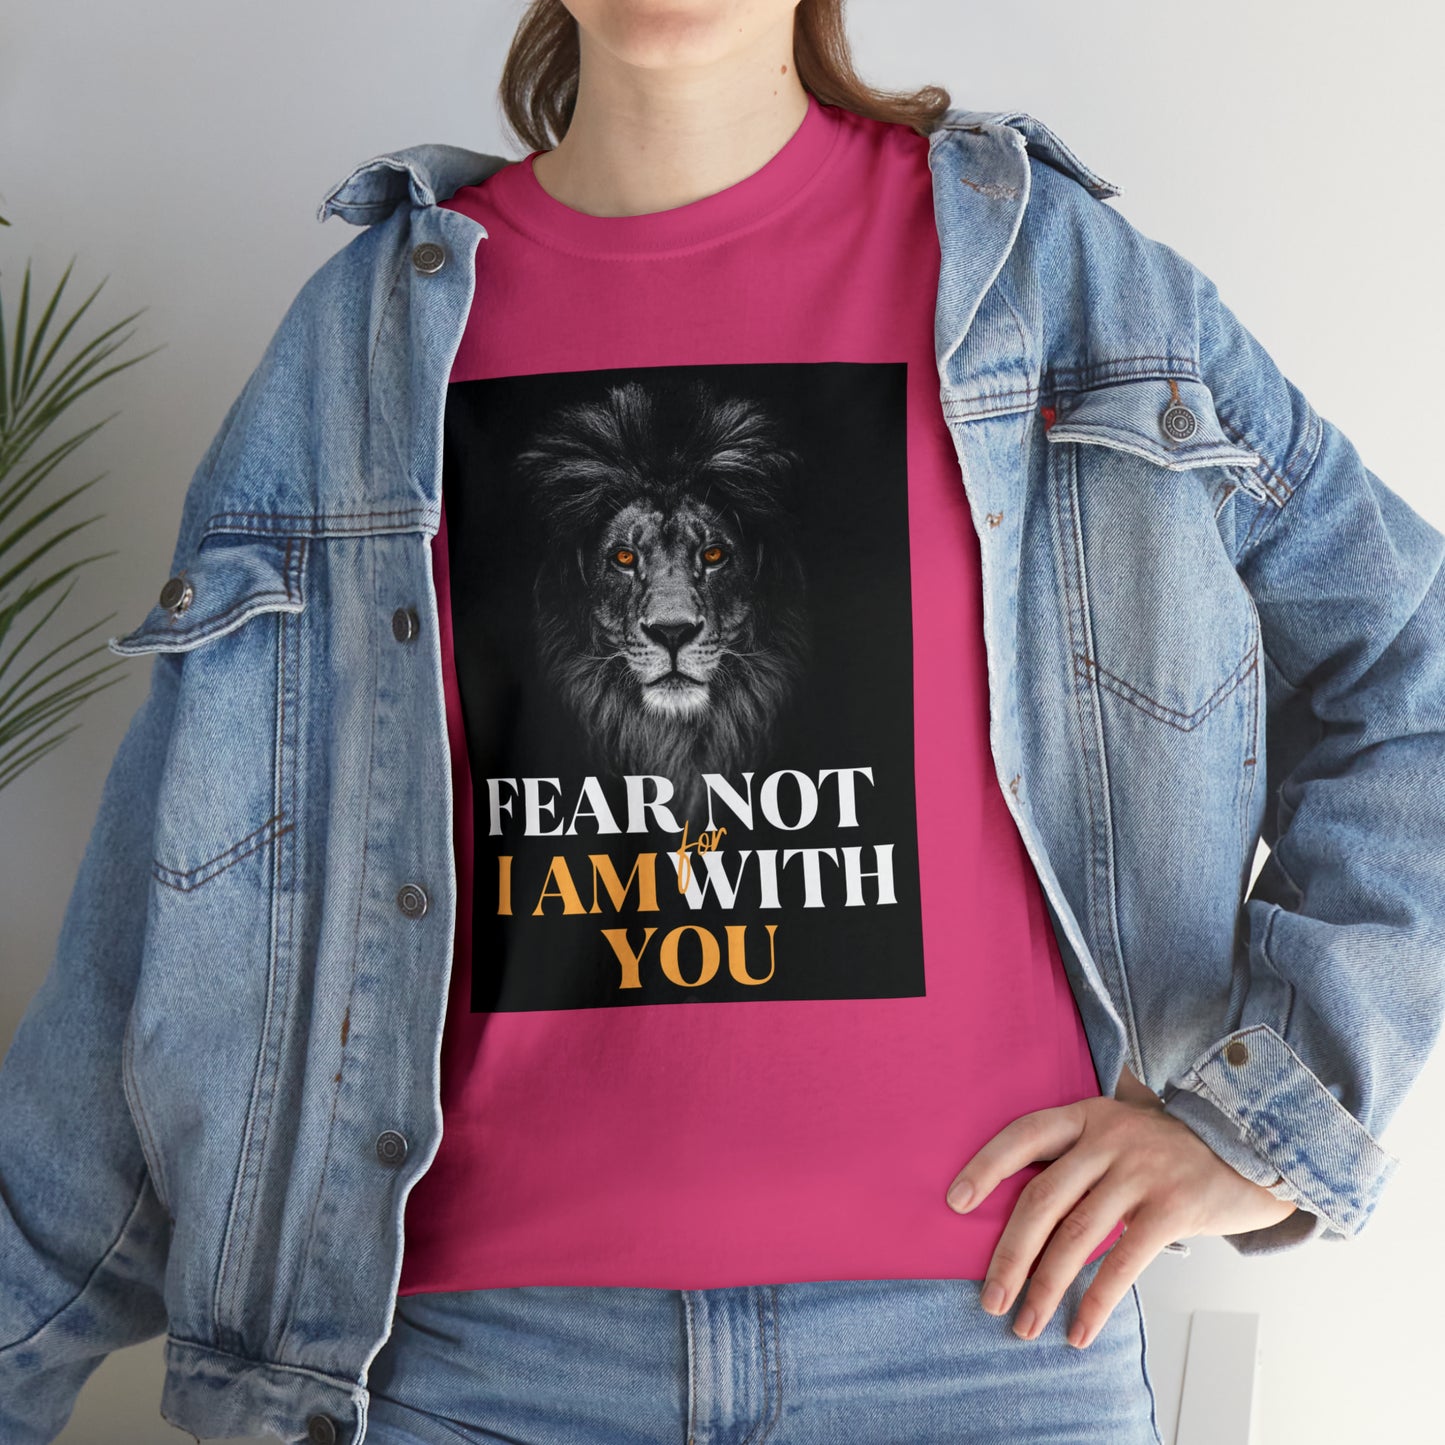 FEAR NOT FOR I AM WITH YOU